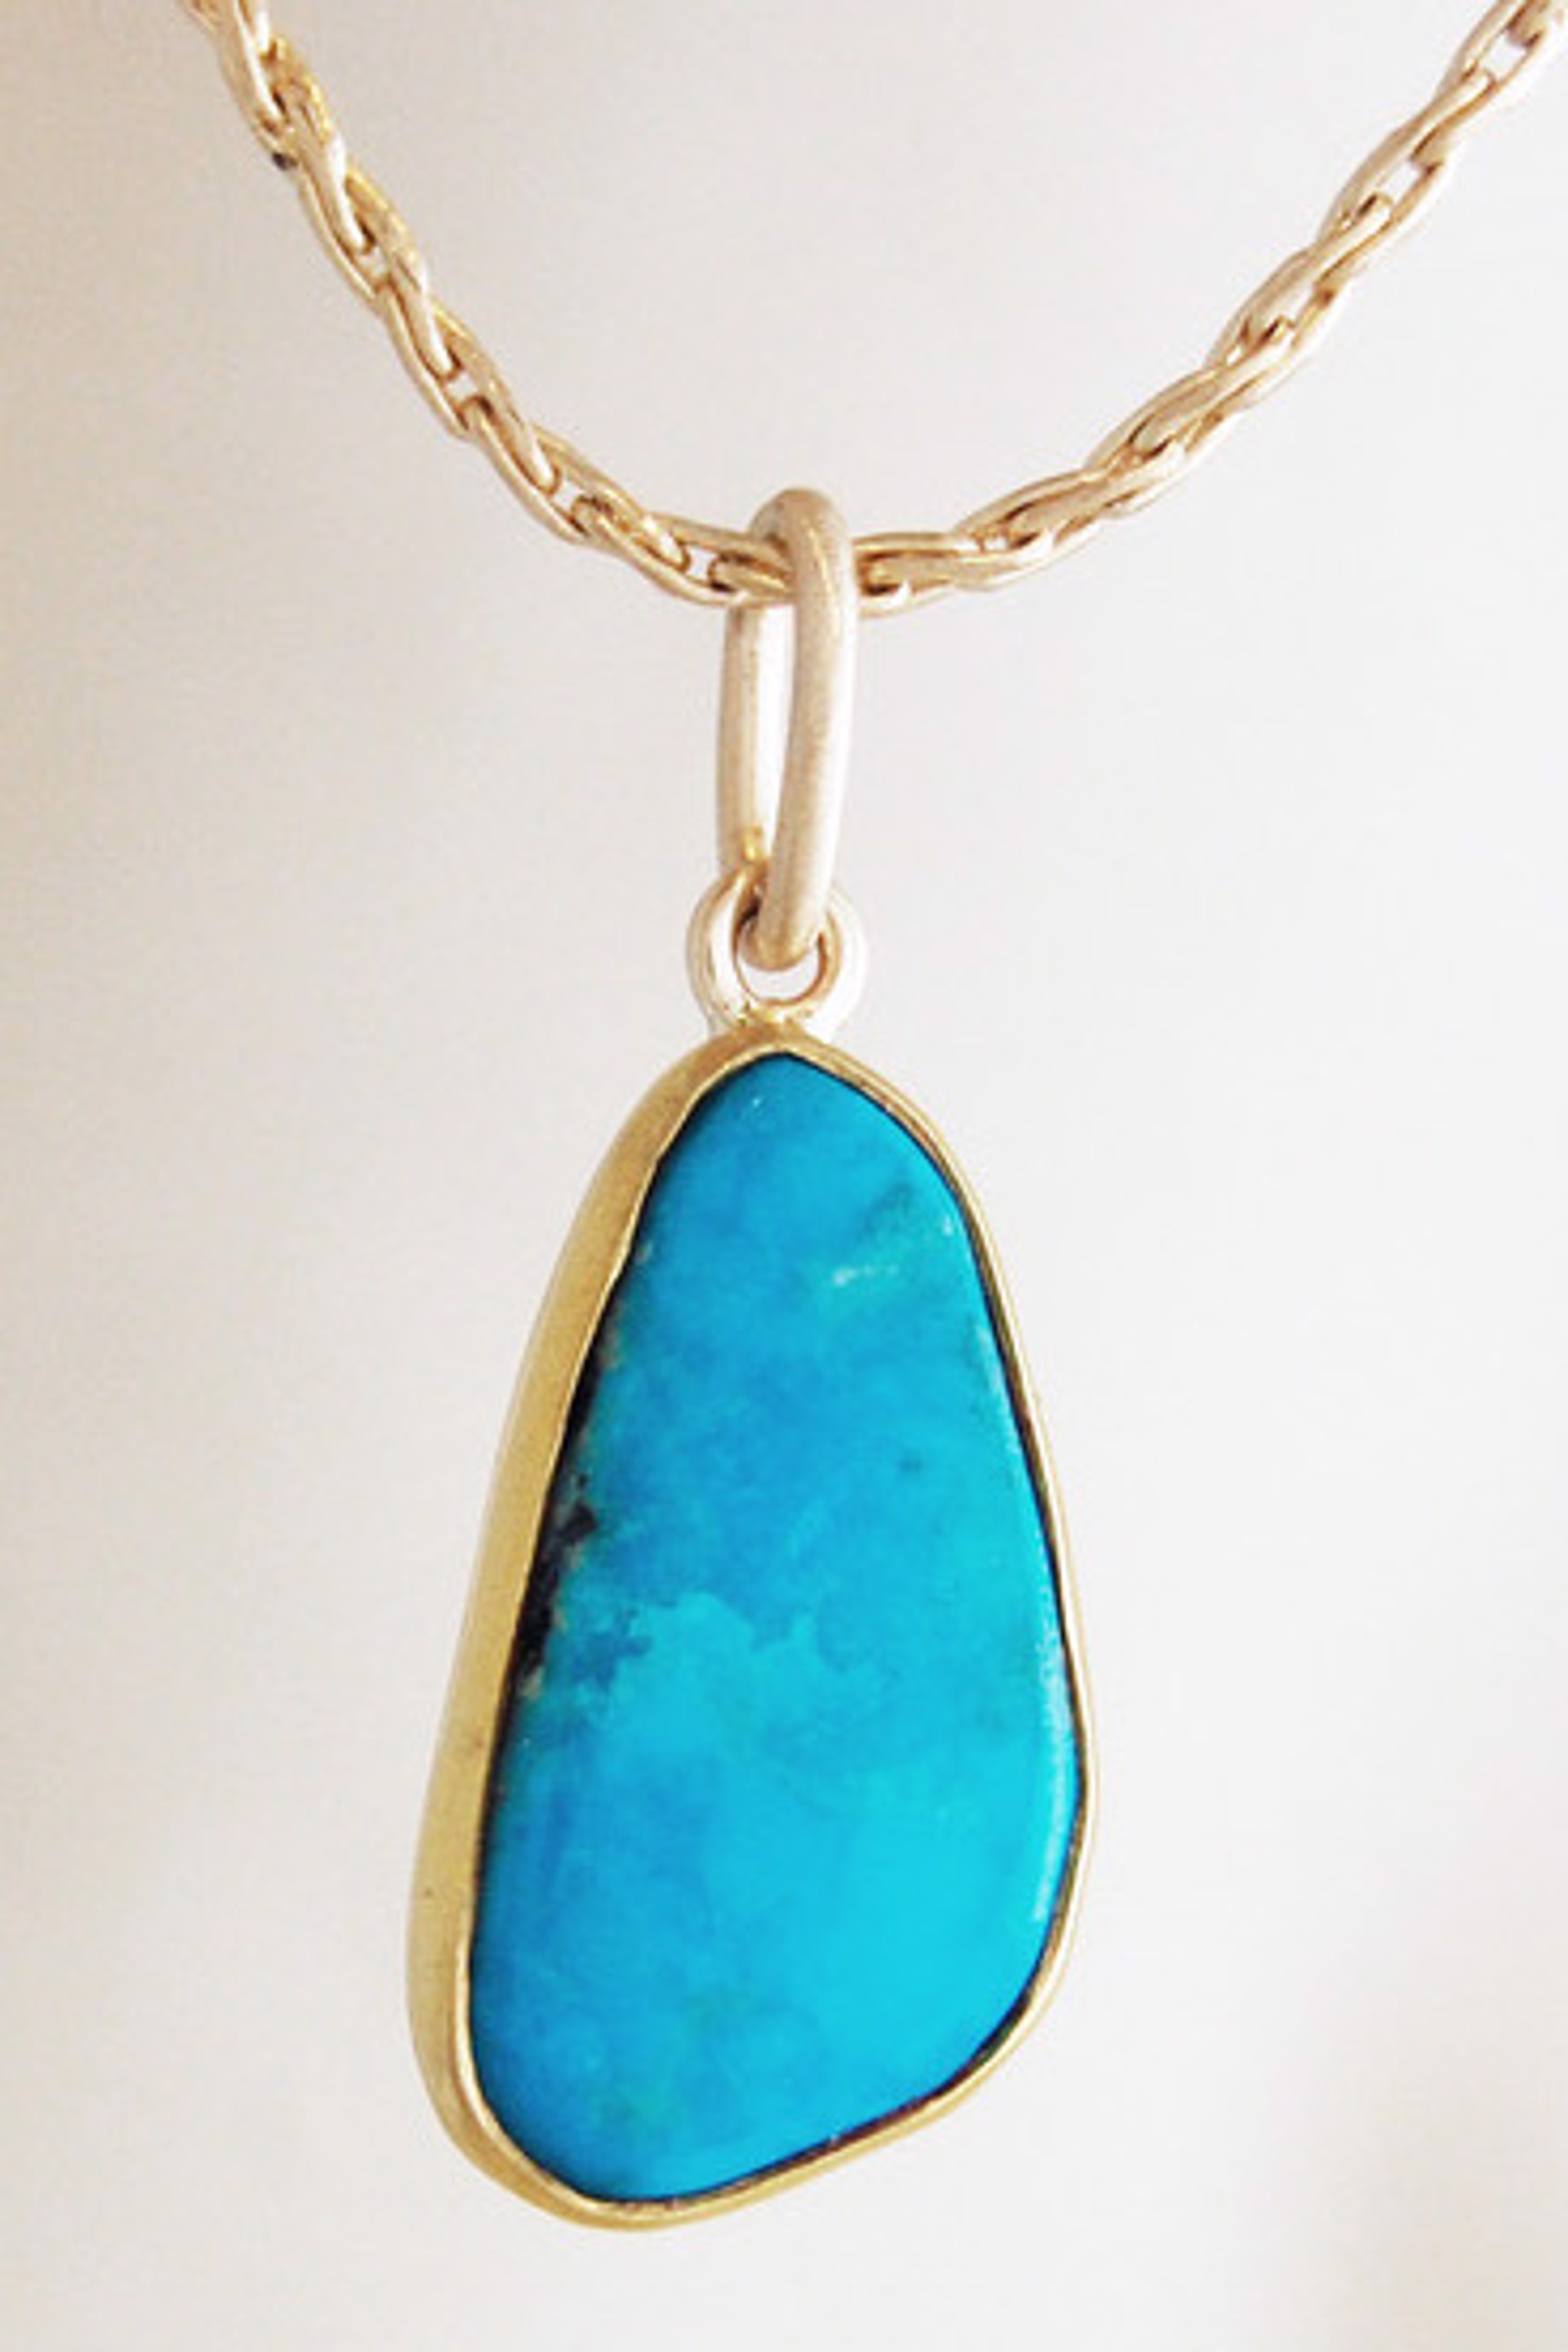 Pendant - Morenci Turquoise With 147K In 24K Bezel - 18" 14K Chain - #189 by Ken and Barbara Newman